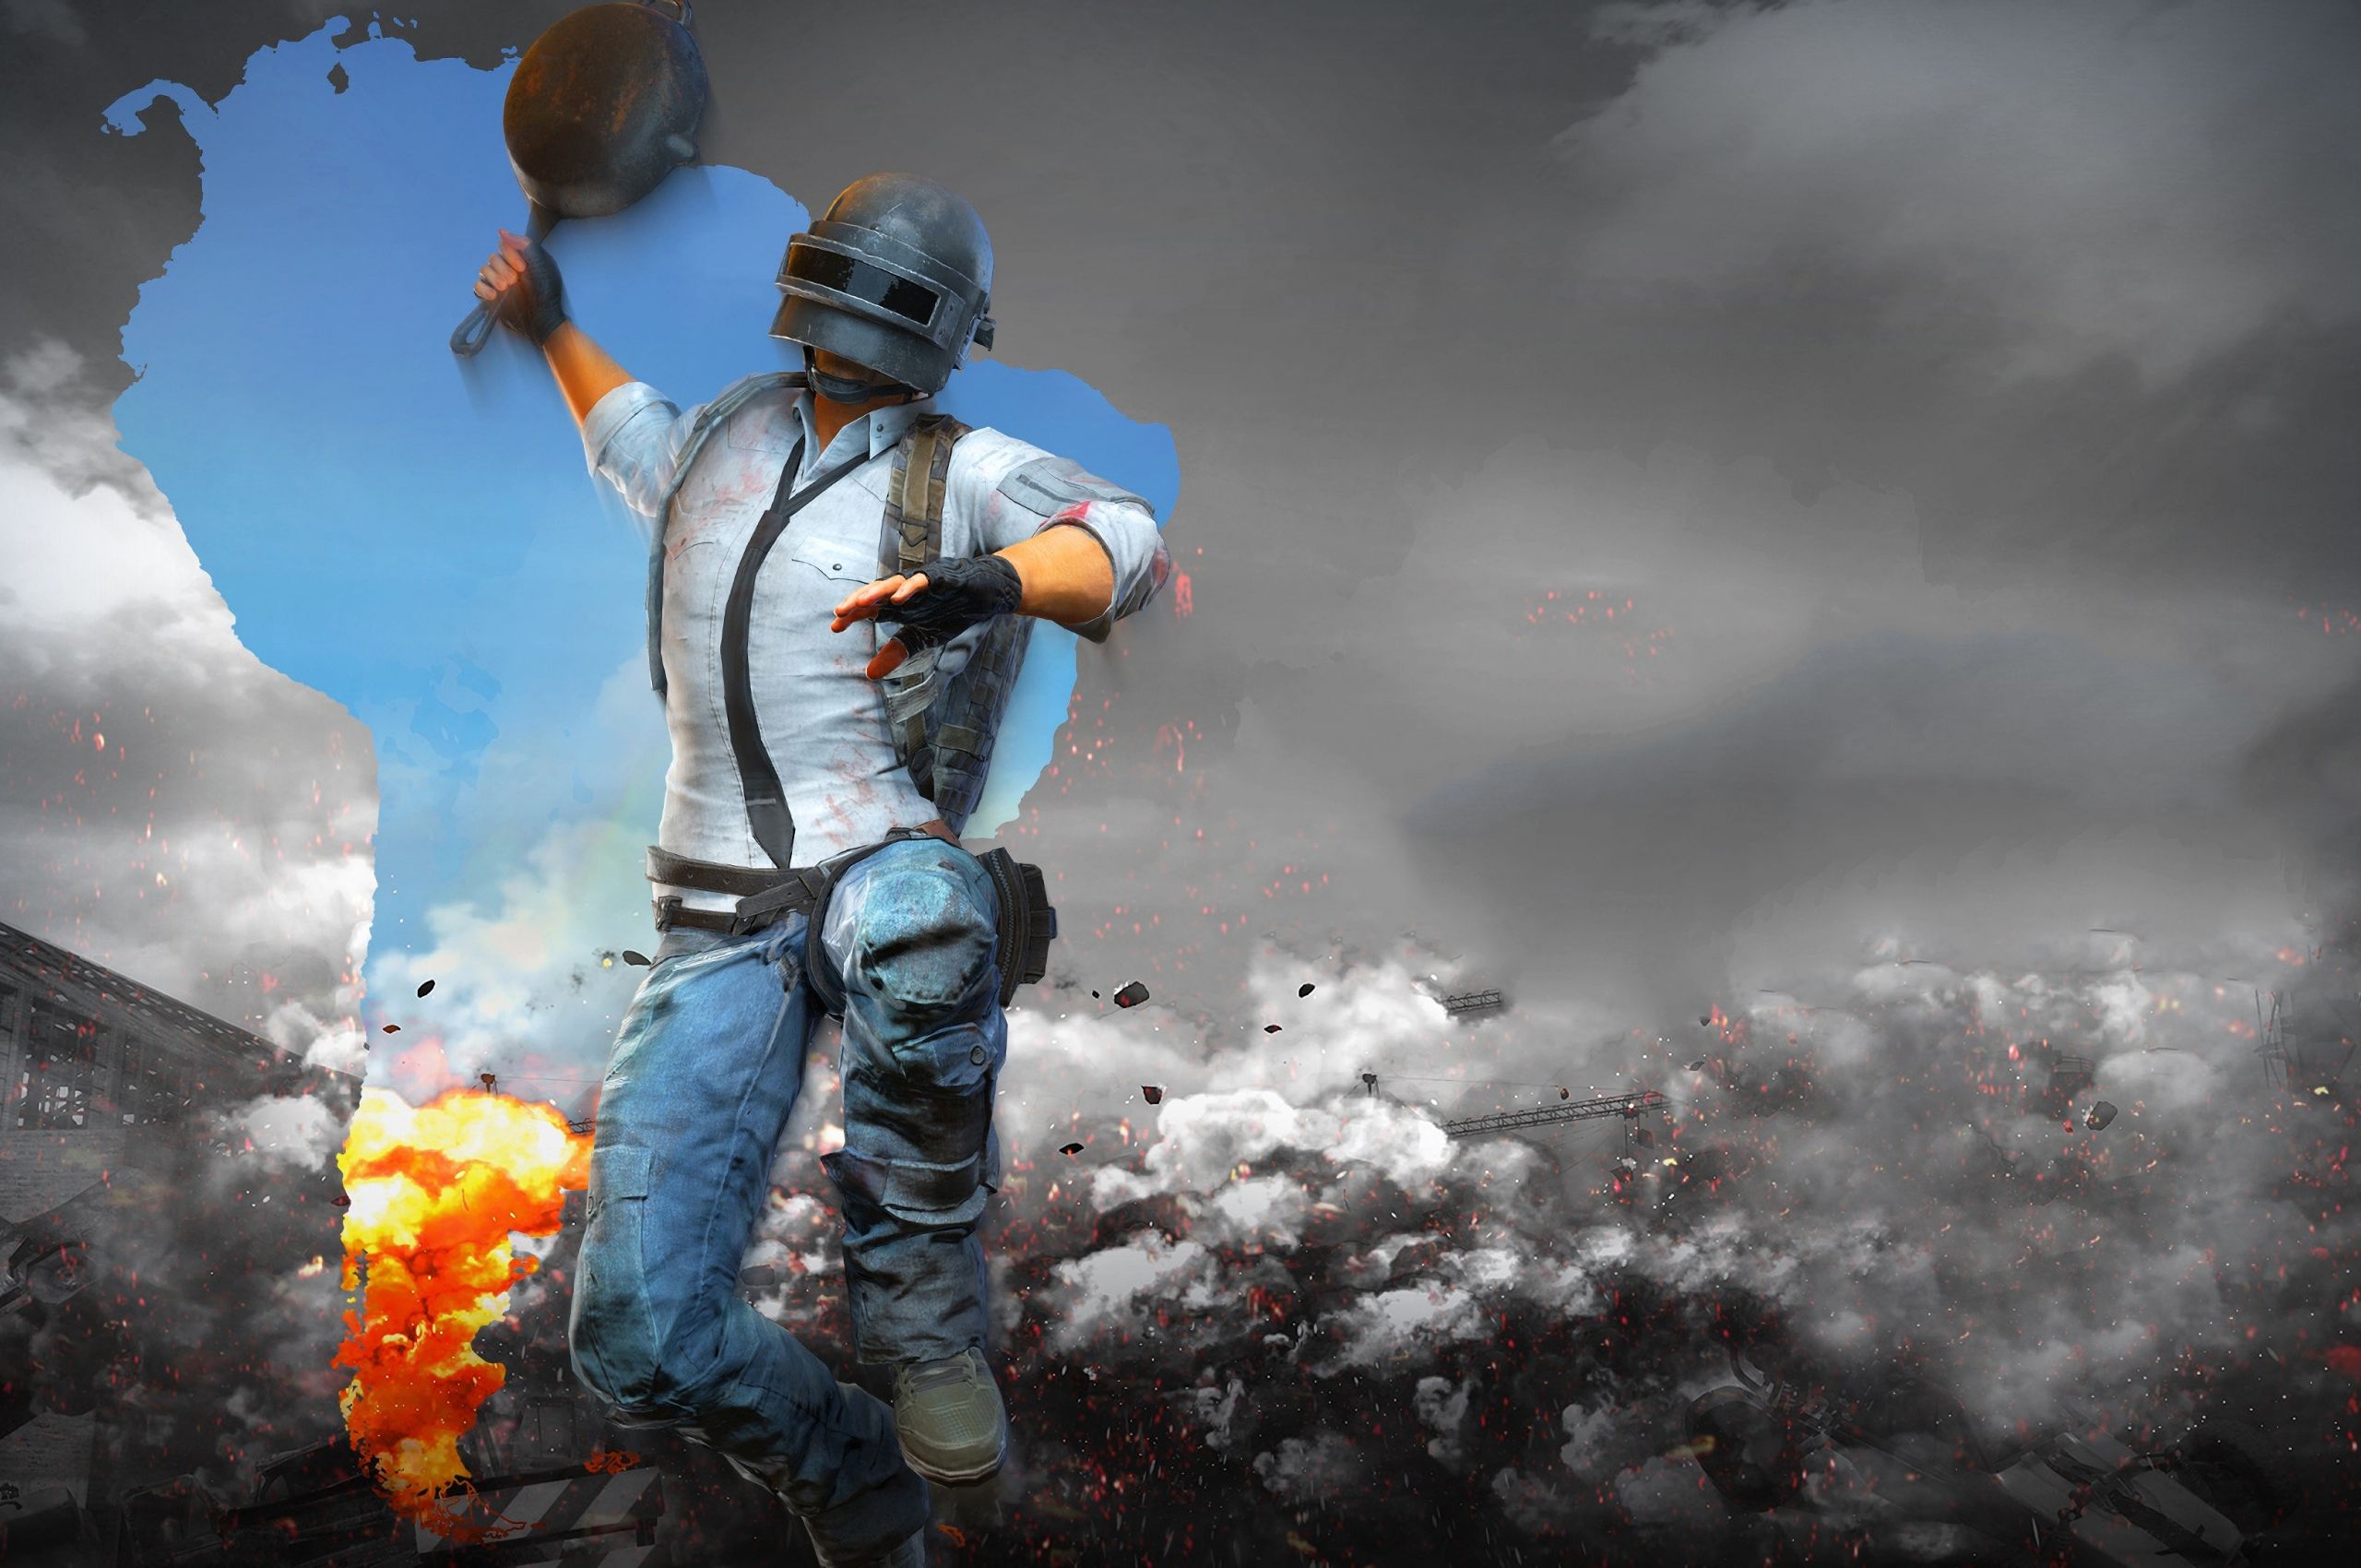 Free download 12 PUBG Wallpaper in Full HD for PC and Phone